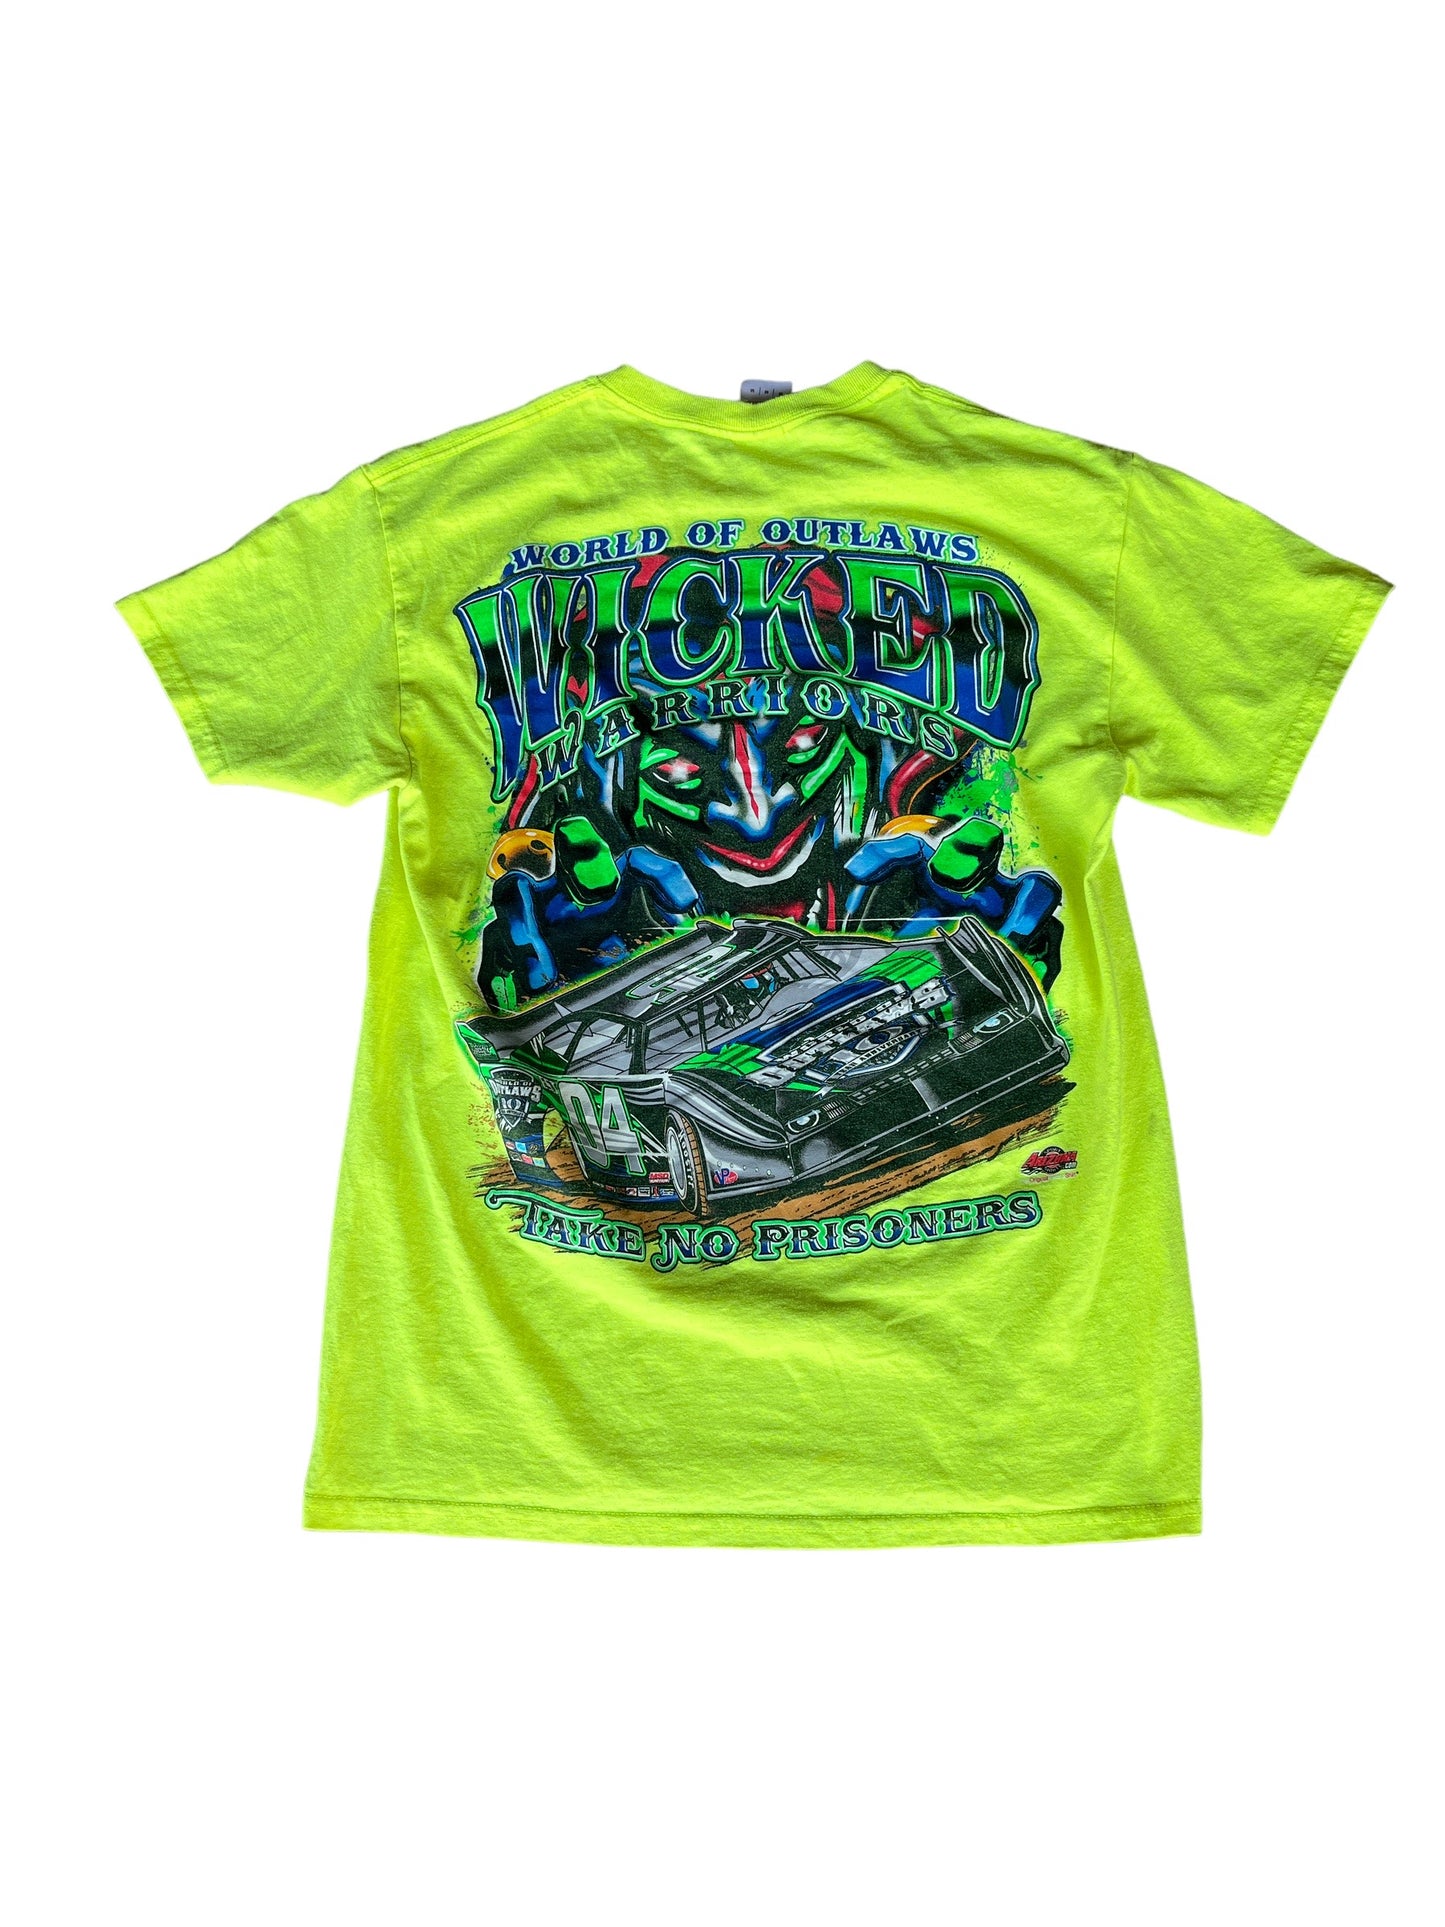 Heavyweight "World Of Outlaws Wicked Warriors" Tee